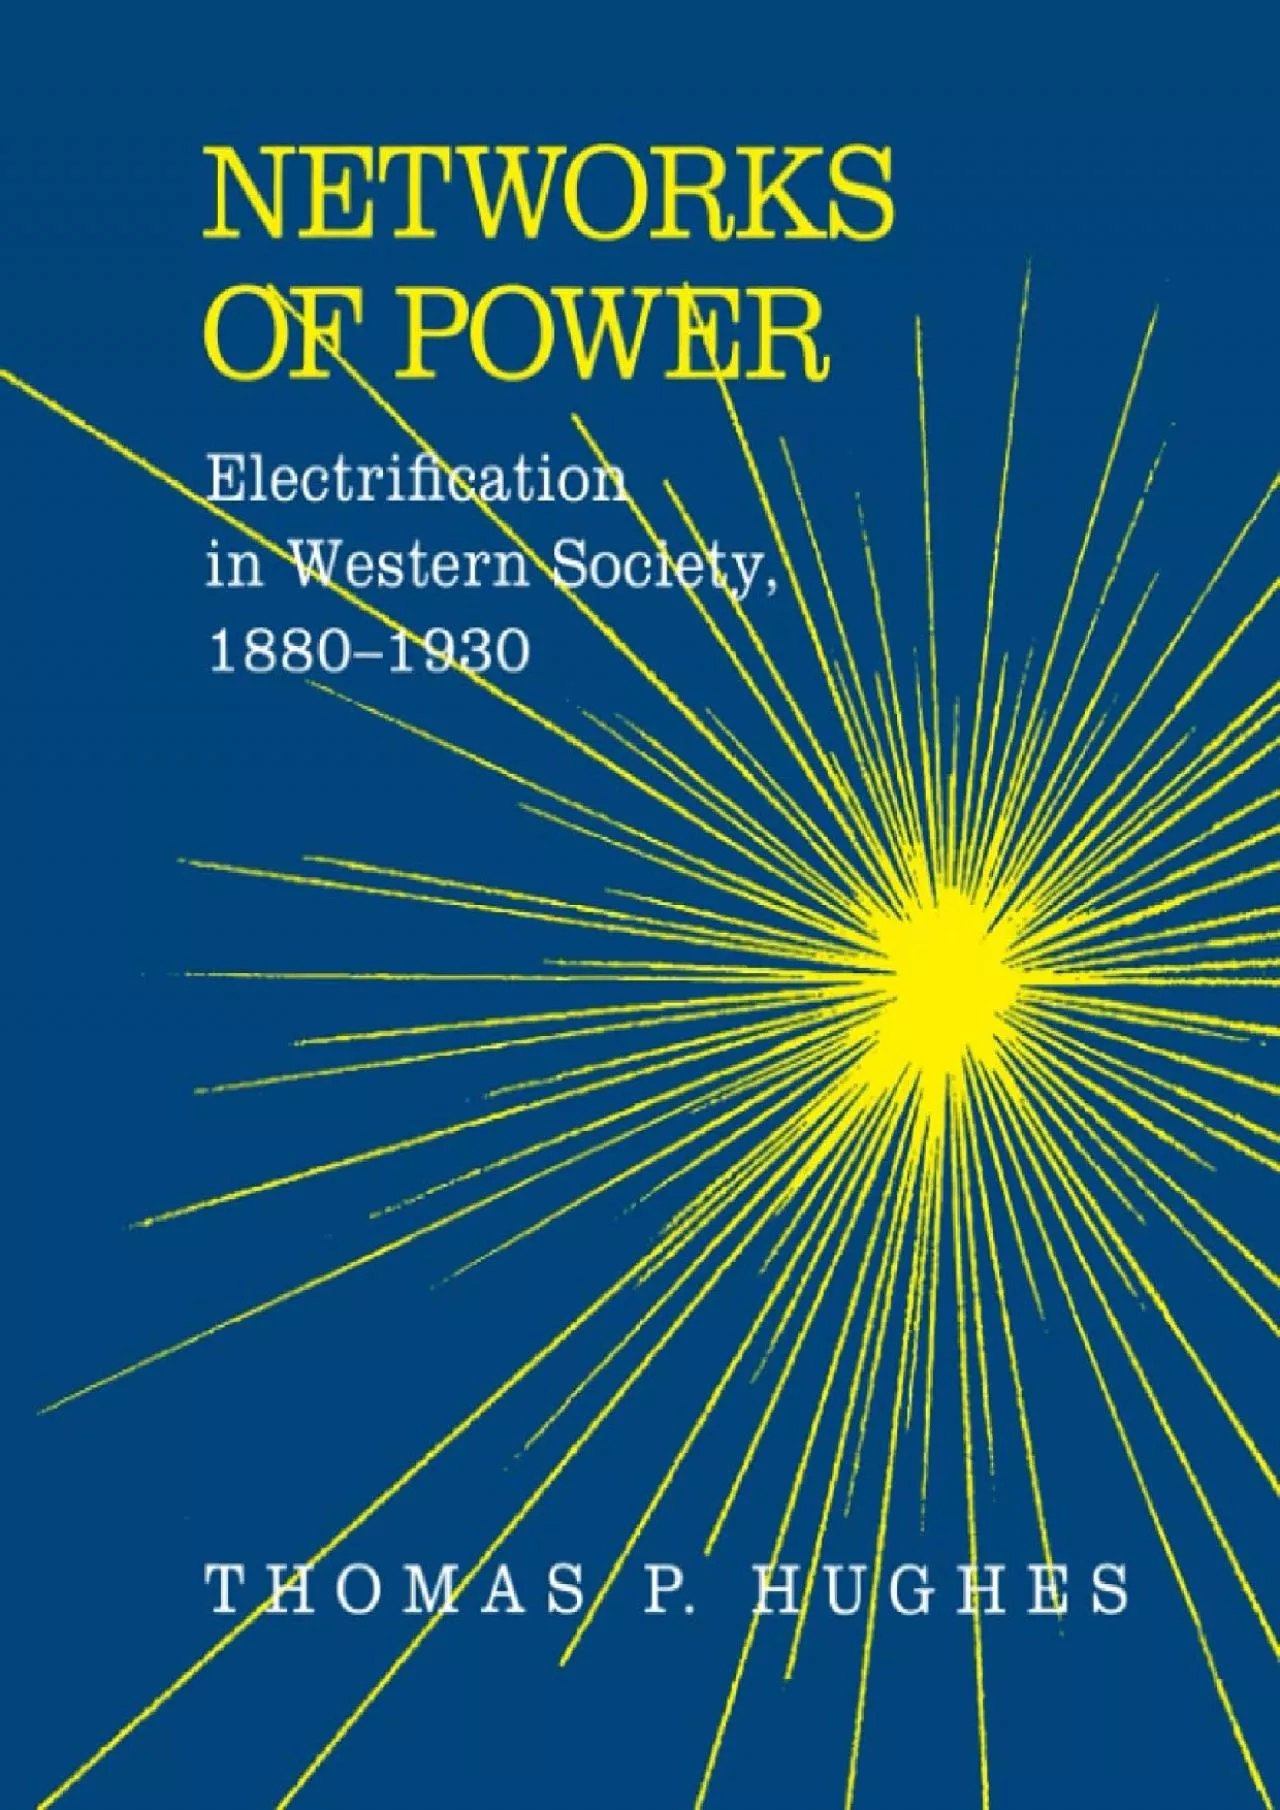 [DOWNLOAD]-Networks of Power: Electrification in Western Society, 1880-1930 (Softshell